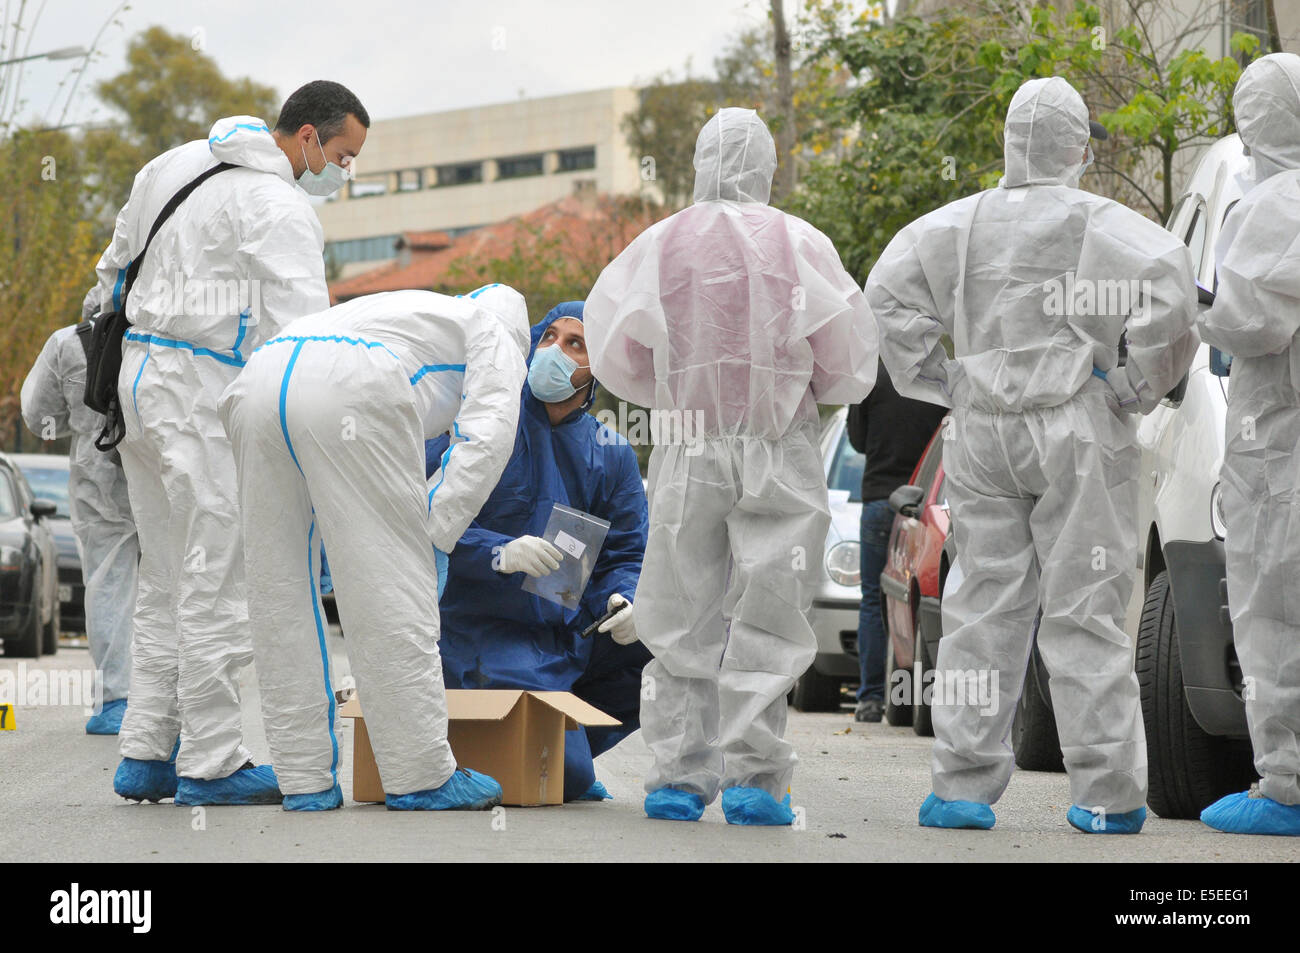 30 December 2010 - Athens, Greece - Forensic police officers gather evidence at the scene of a bomb attack on a court building i Stock Photo